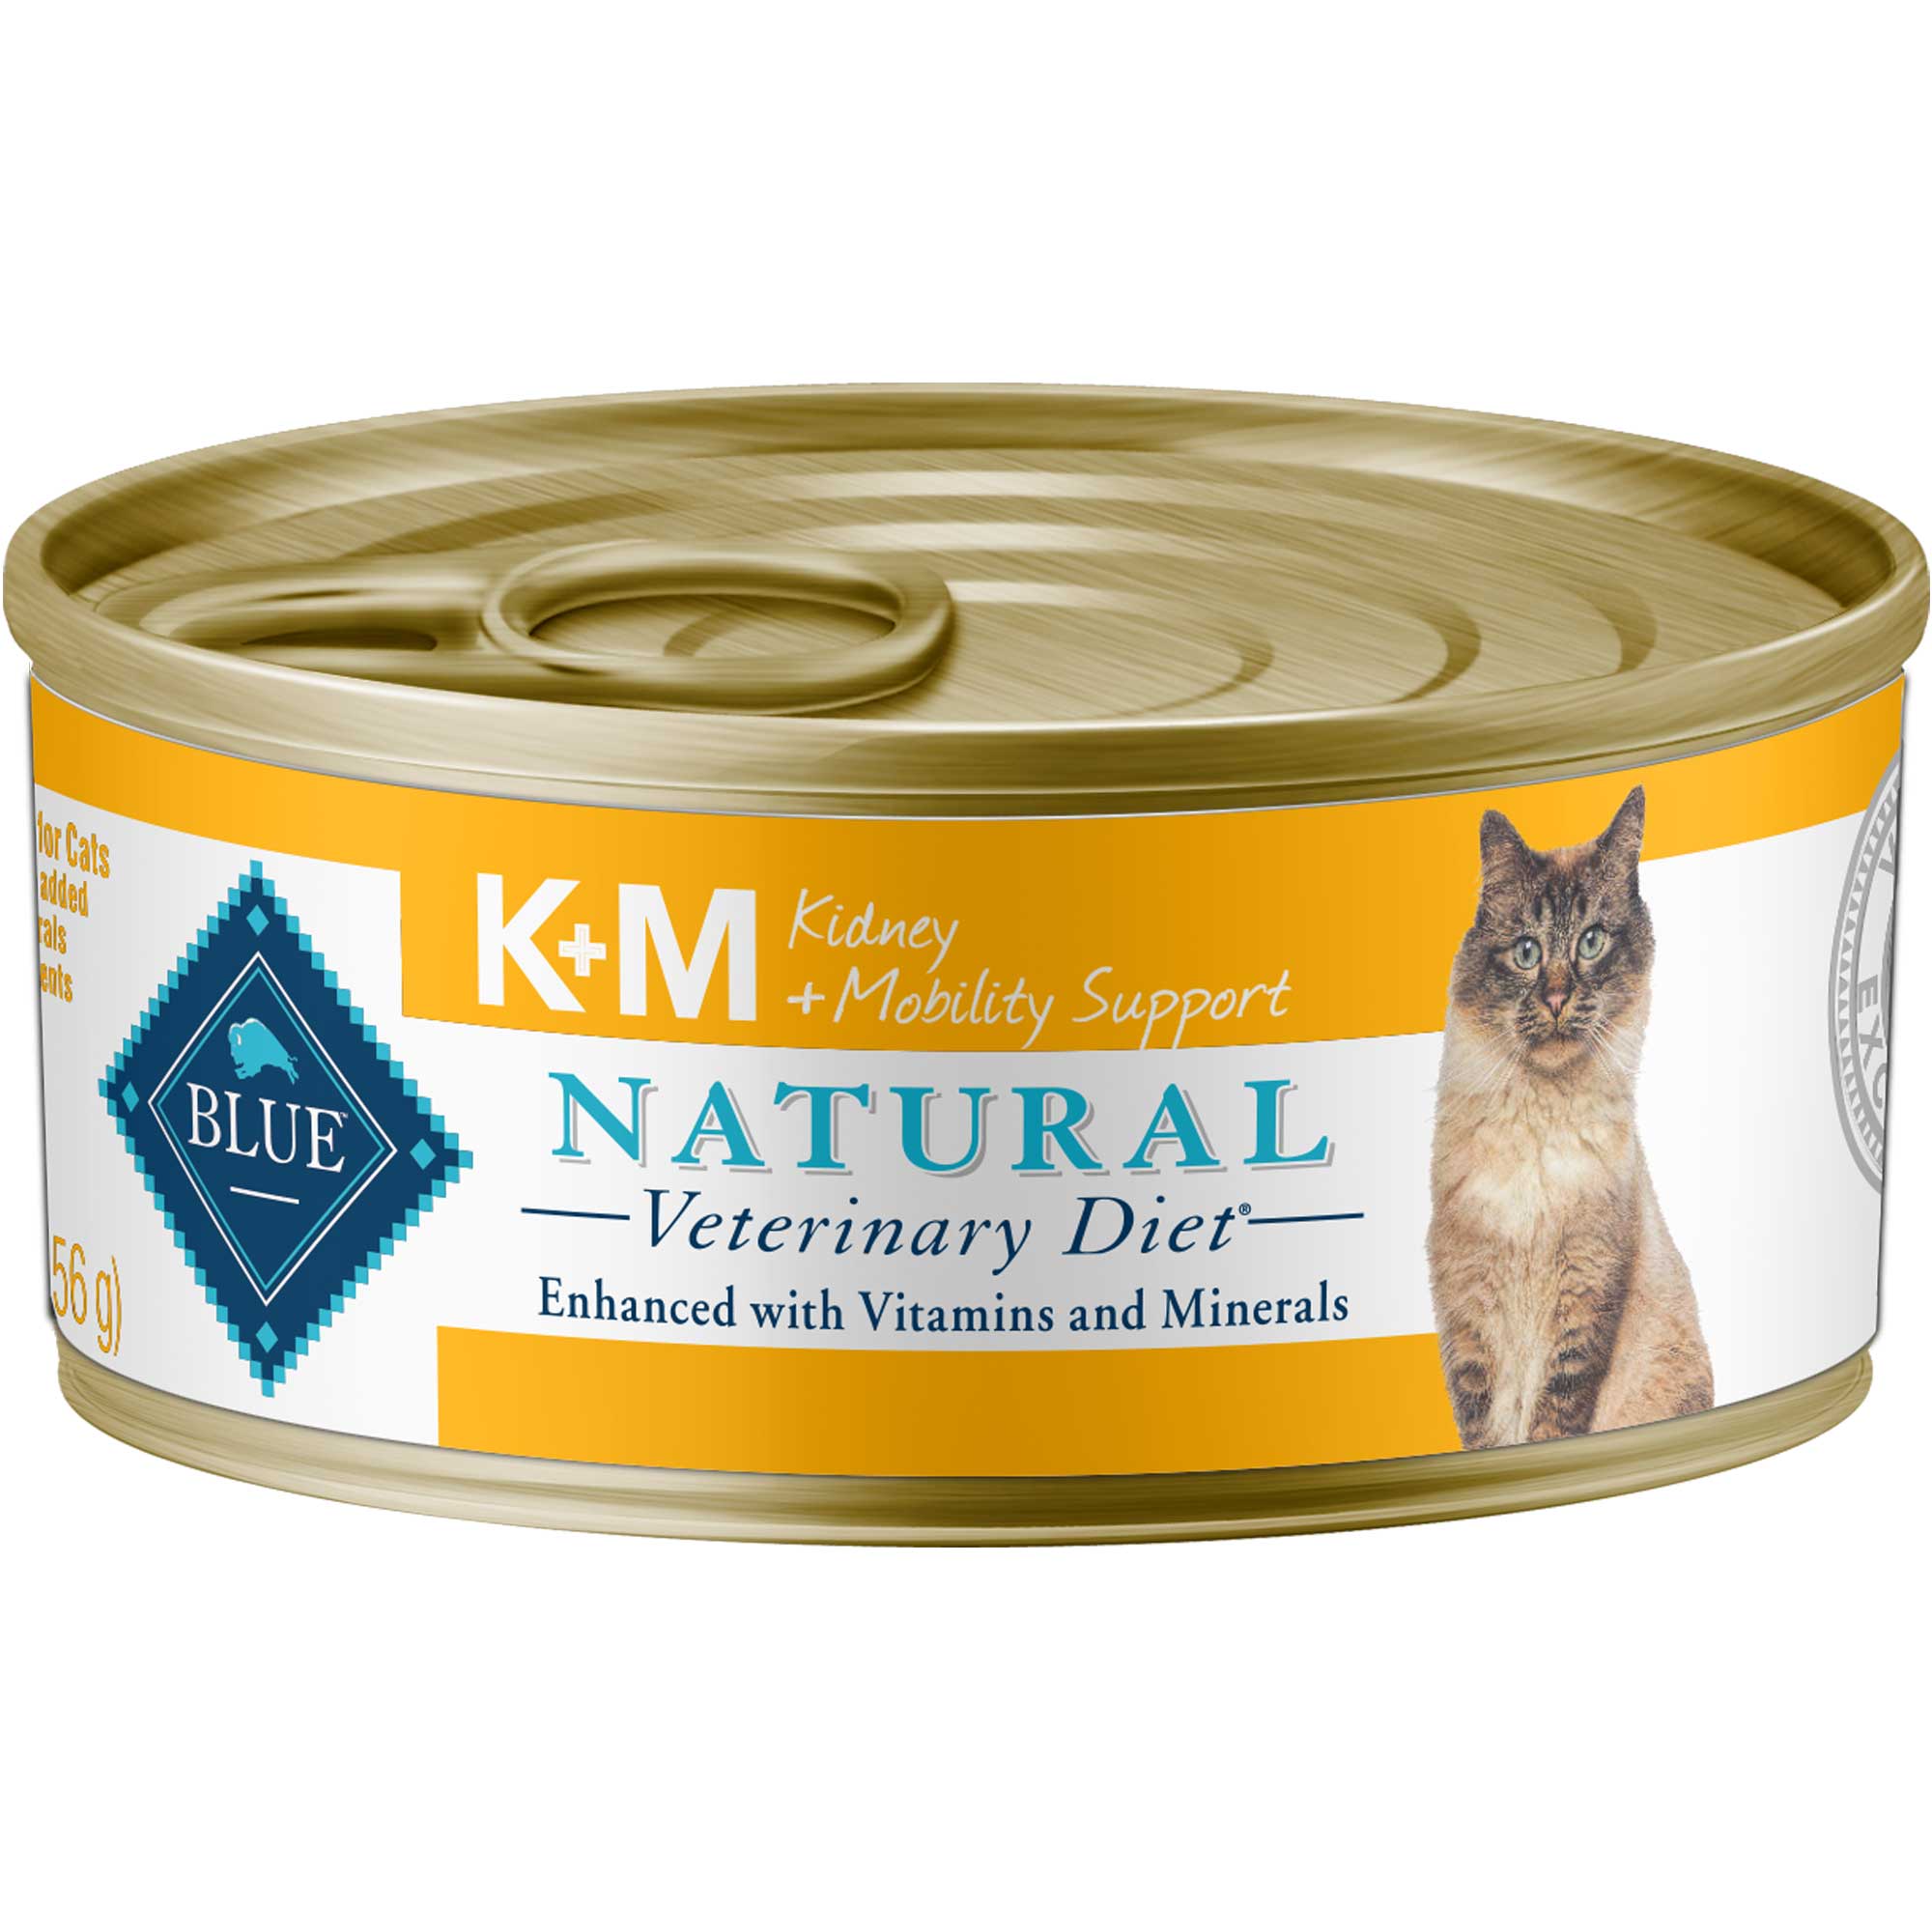 BLUE Natural Veterinary Diet K+M Kidney + Mobility Support Canned Cat Food Usage